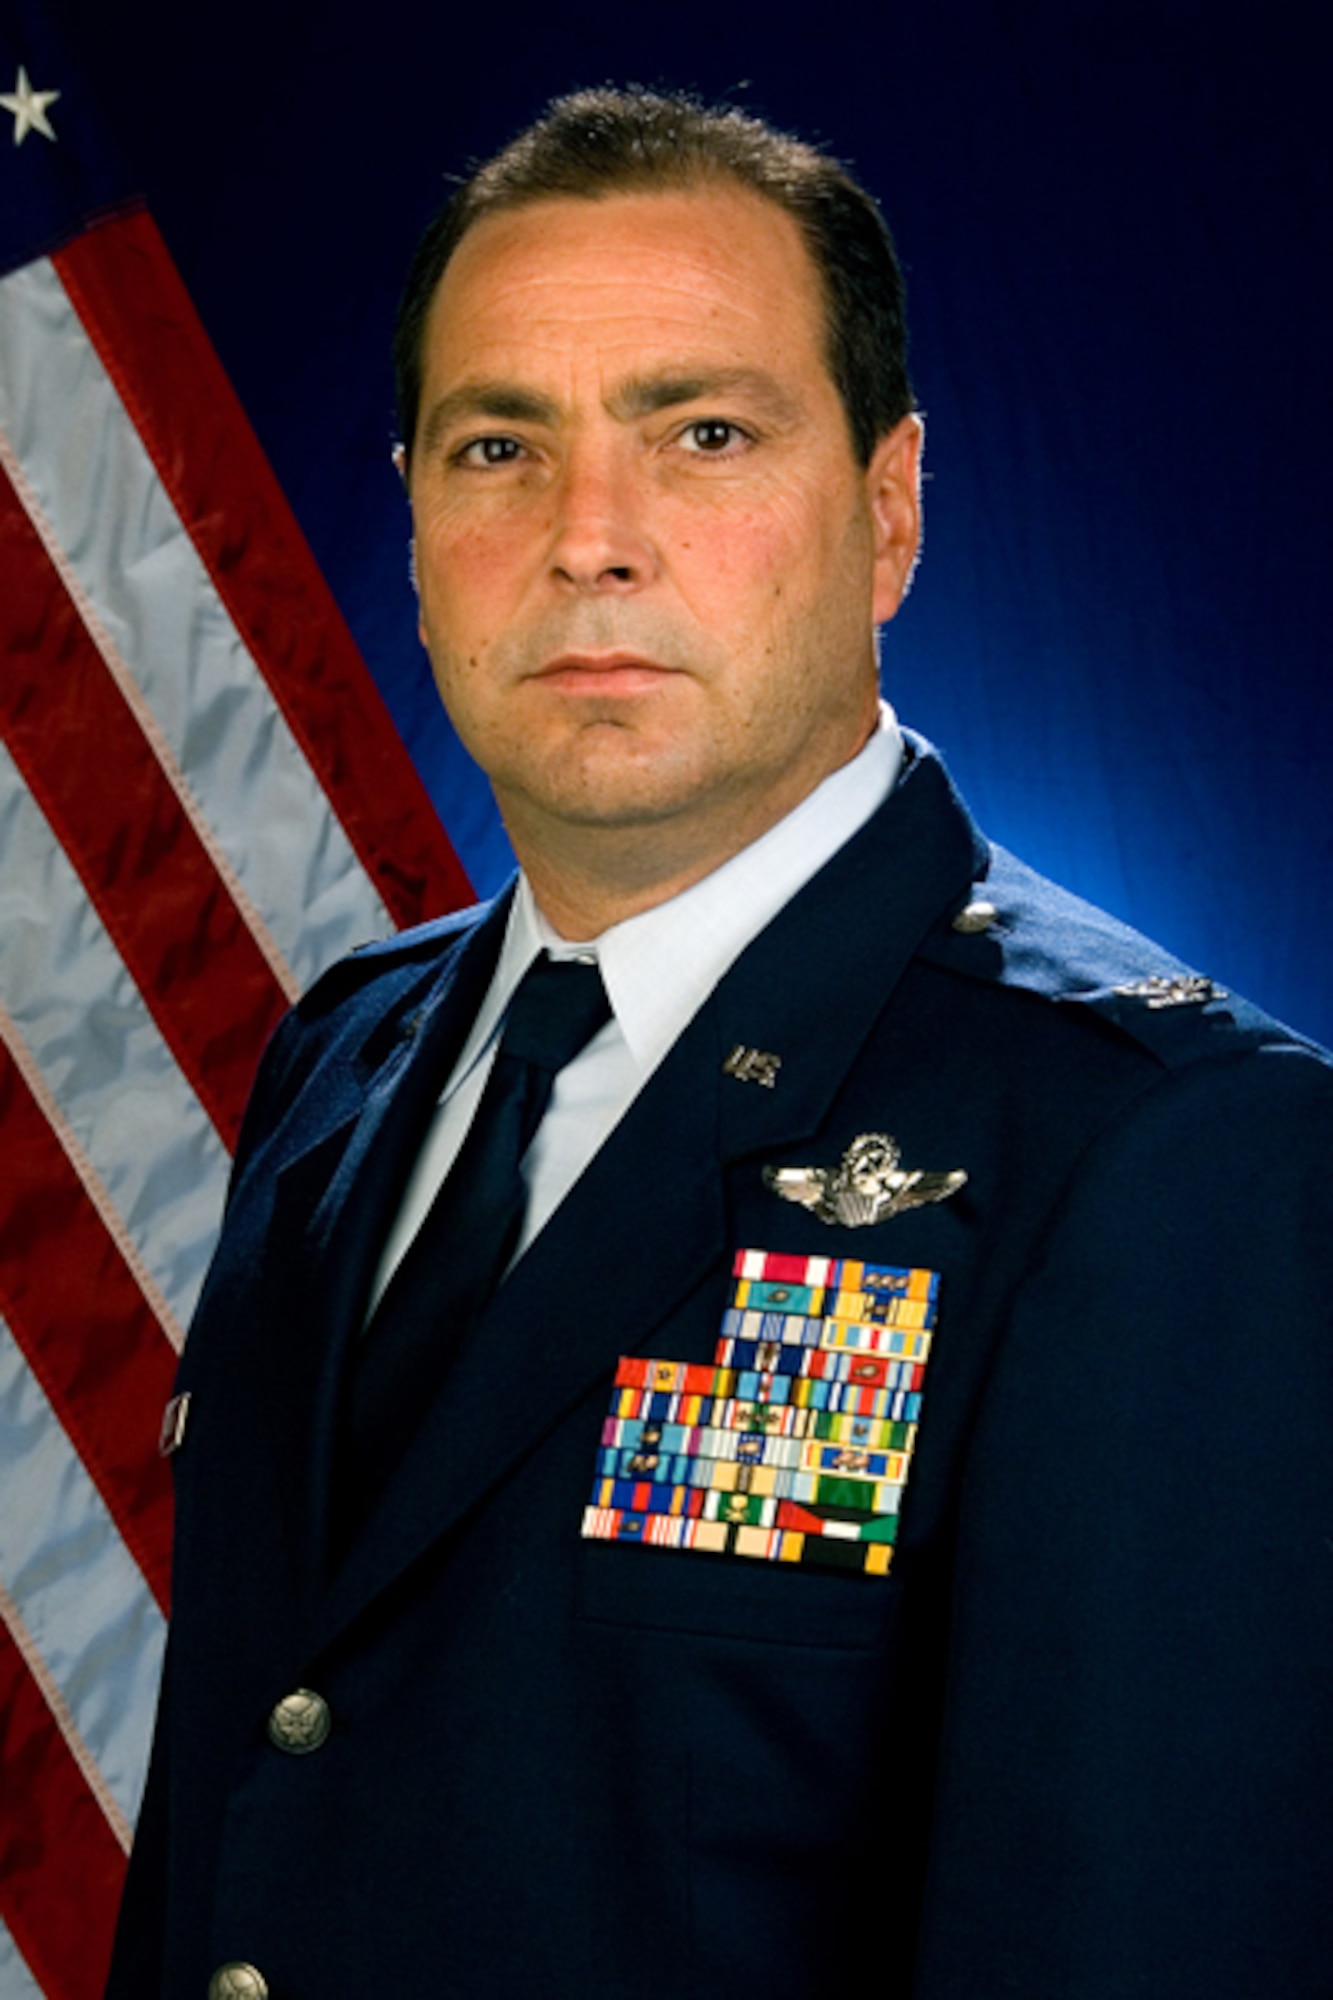 U.S. Air Force Col. Ralph Schwader, vice commander of the Missouri Air National Guard’s 139th Airlift Wing, will assume command of the Wing in January 2014.